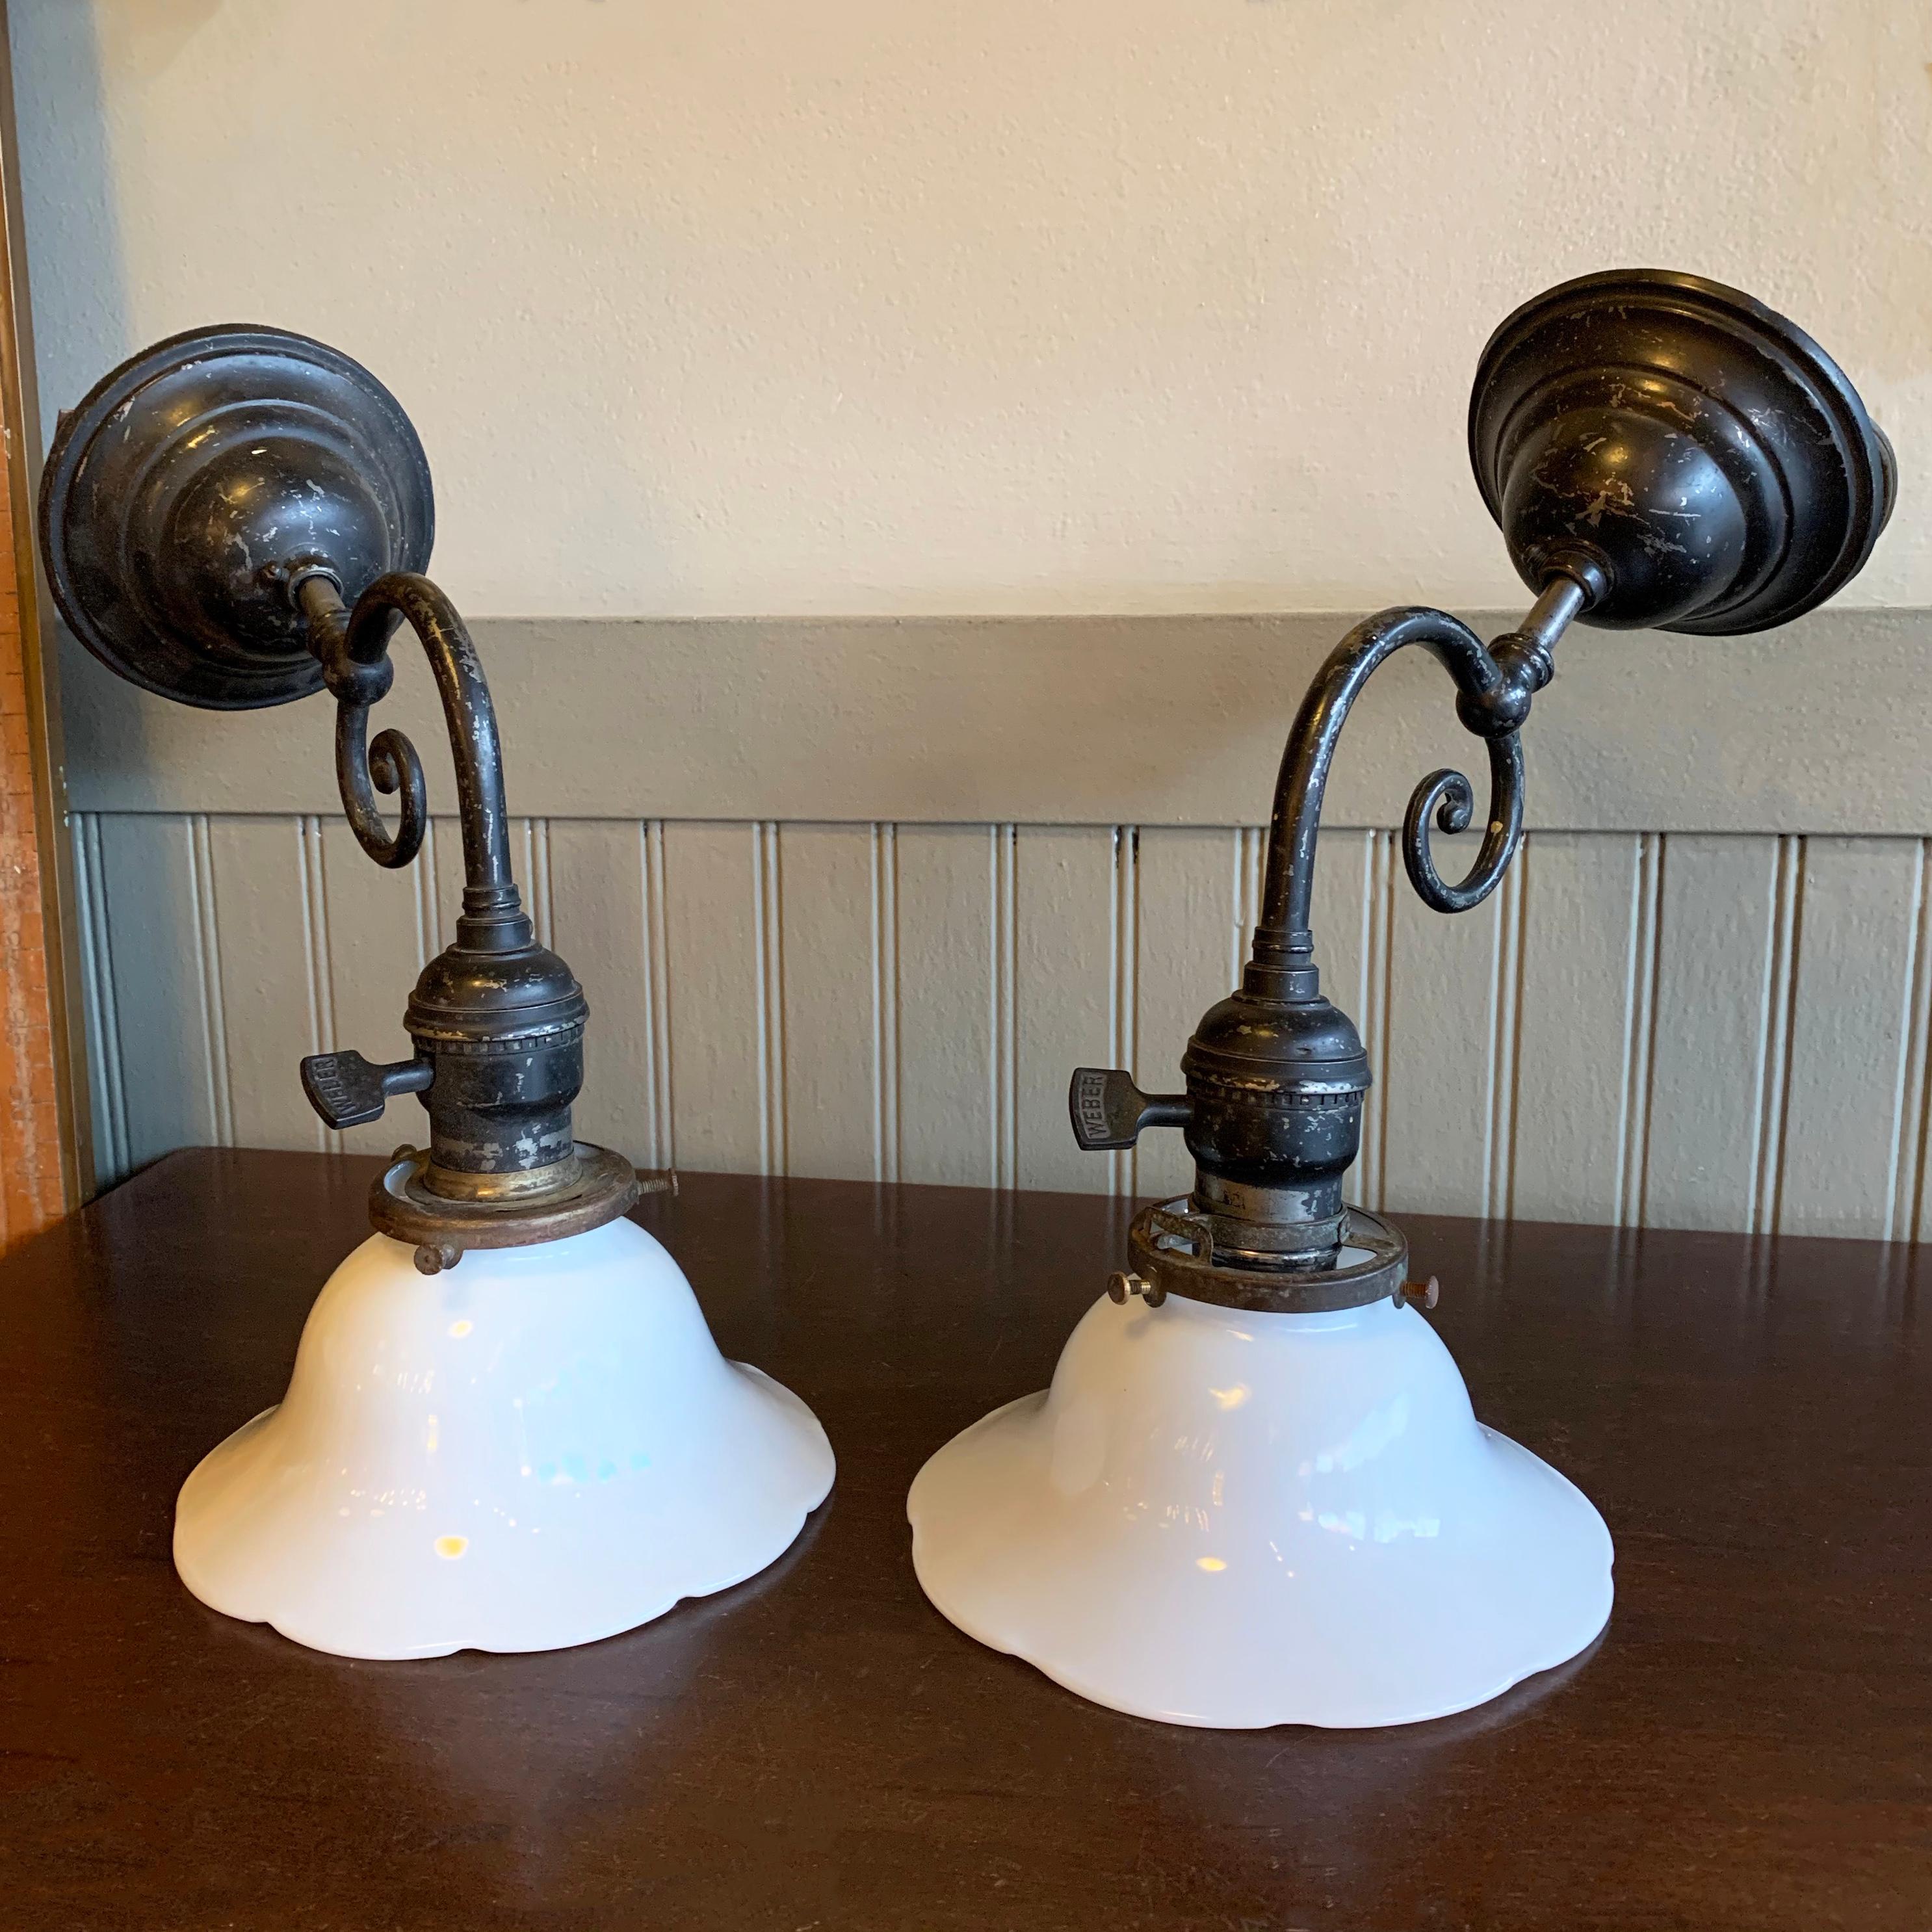 American Industrial Blackened Nickel and Milk Glass Wall Sconce Lamps